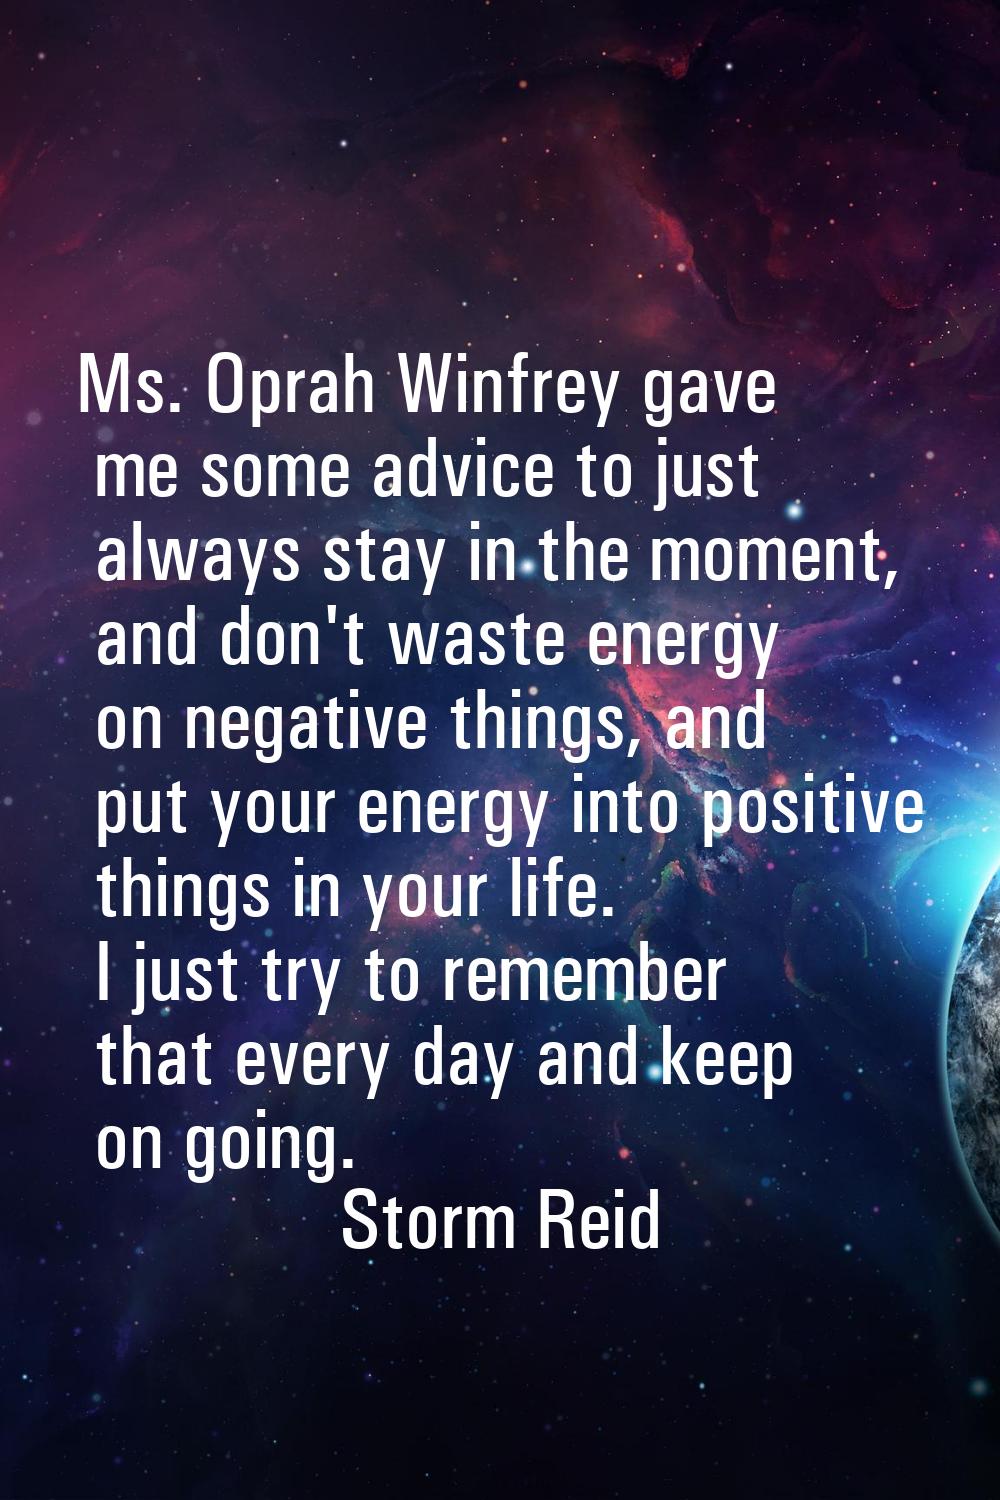 Ms. Oprah Winfrey gave me some advice to just always stay in the moment, and don't waste energy on 